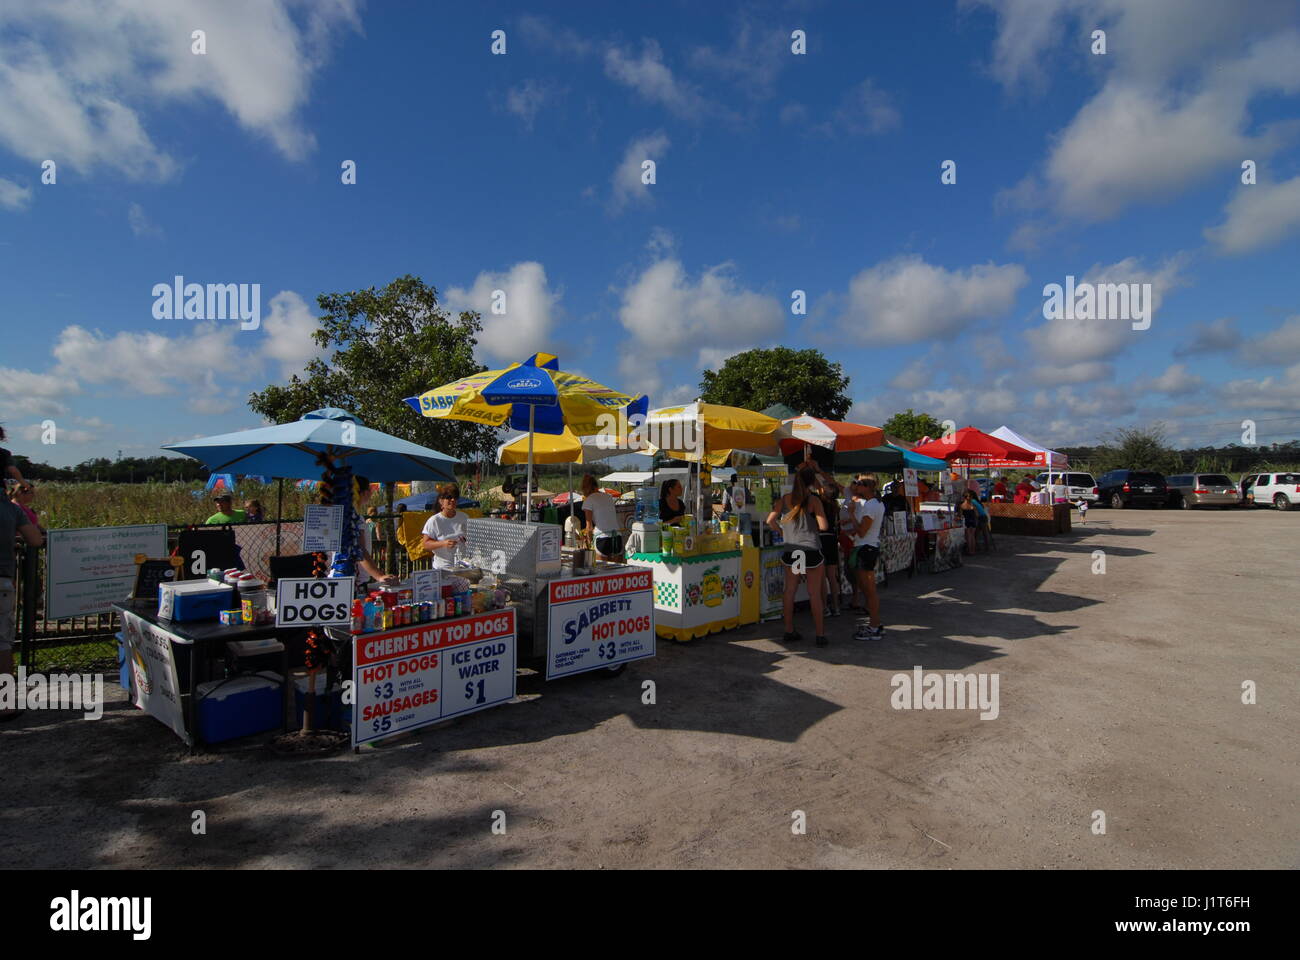 food stands at event Stock Photo